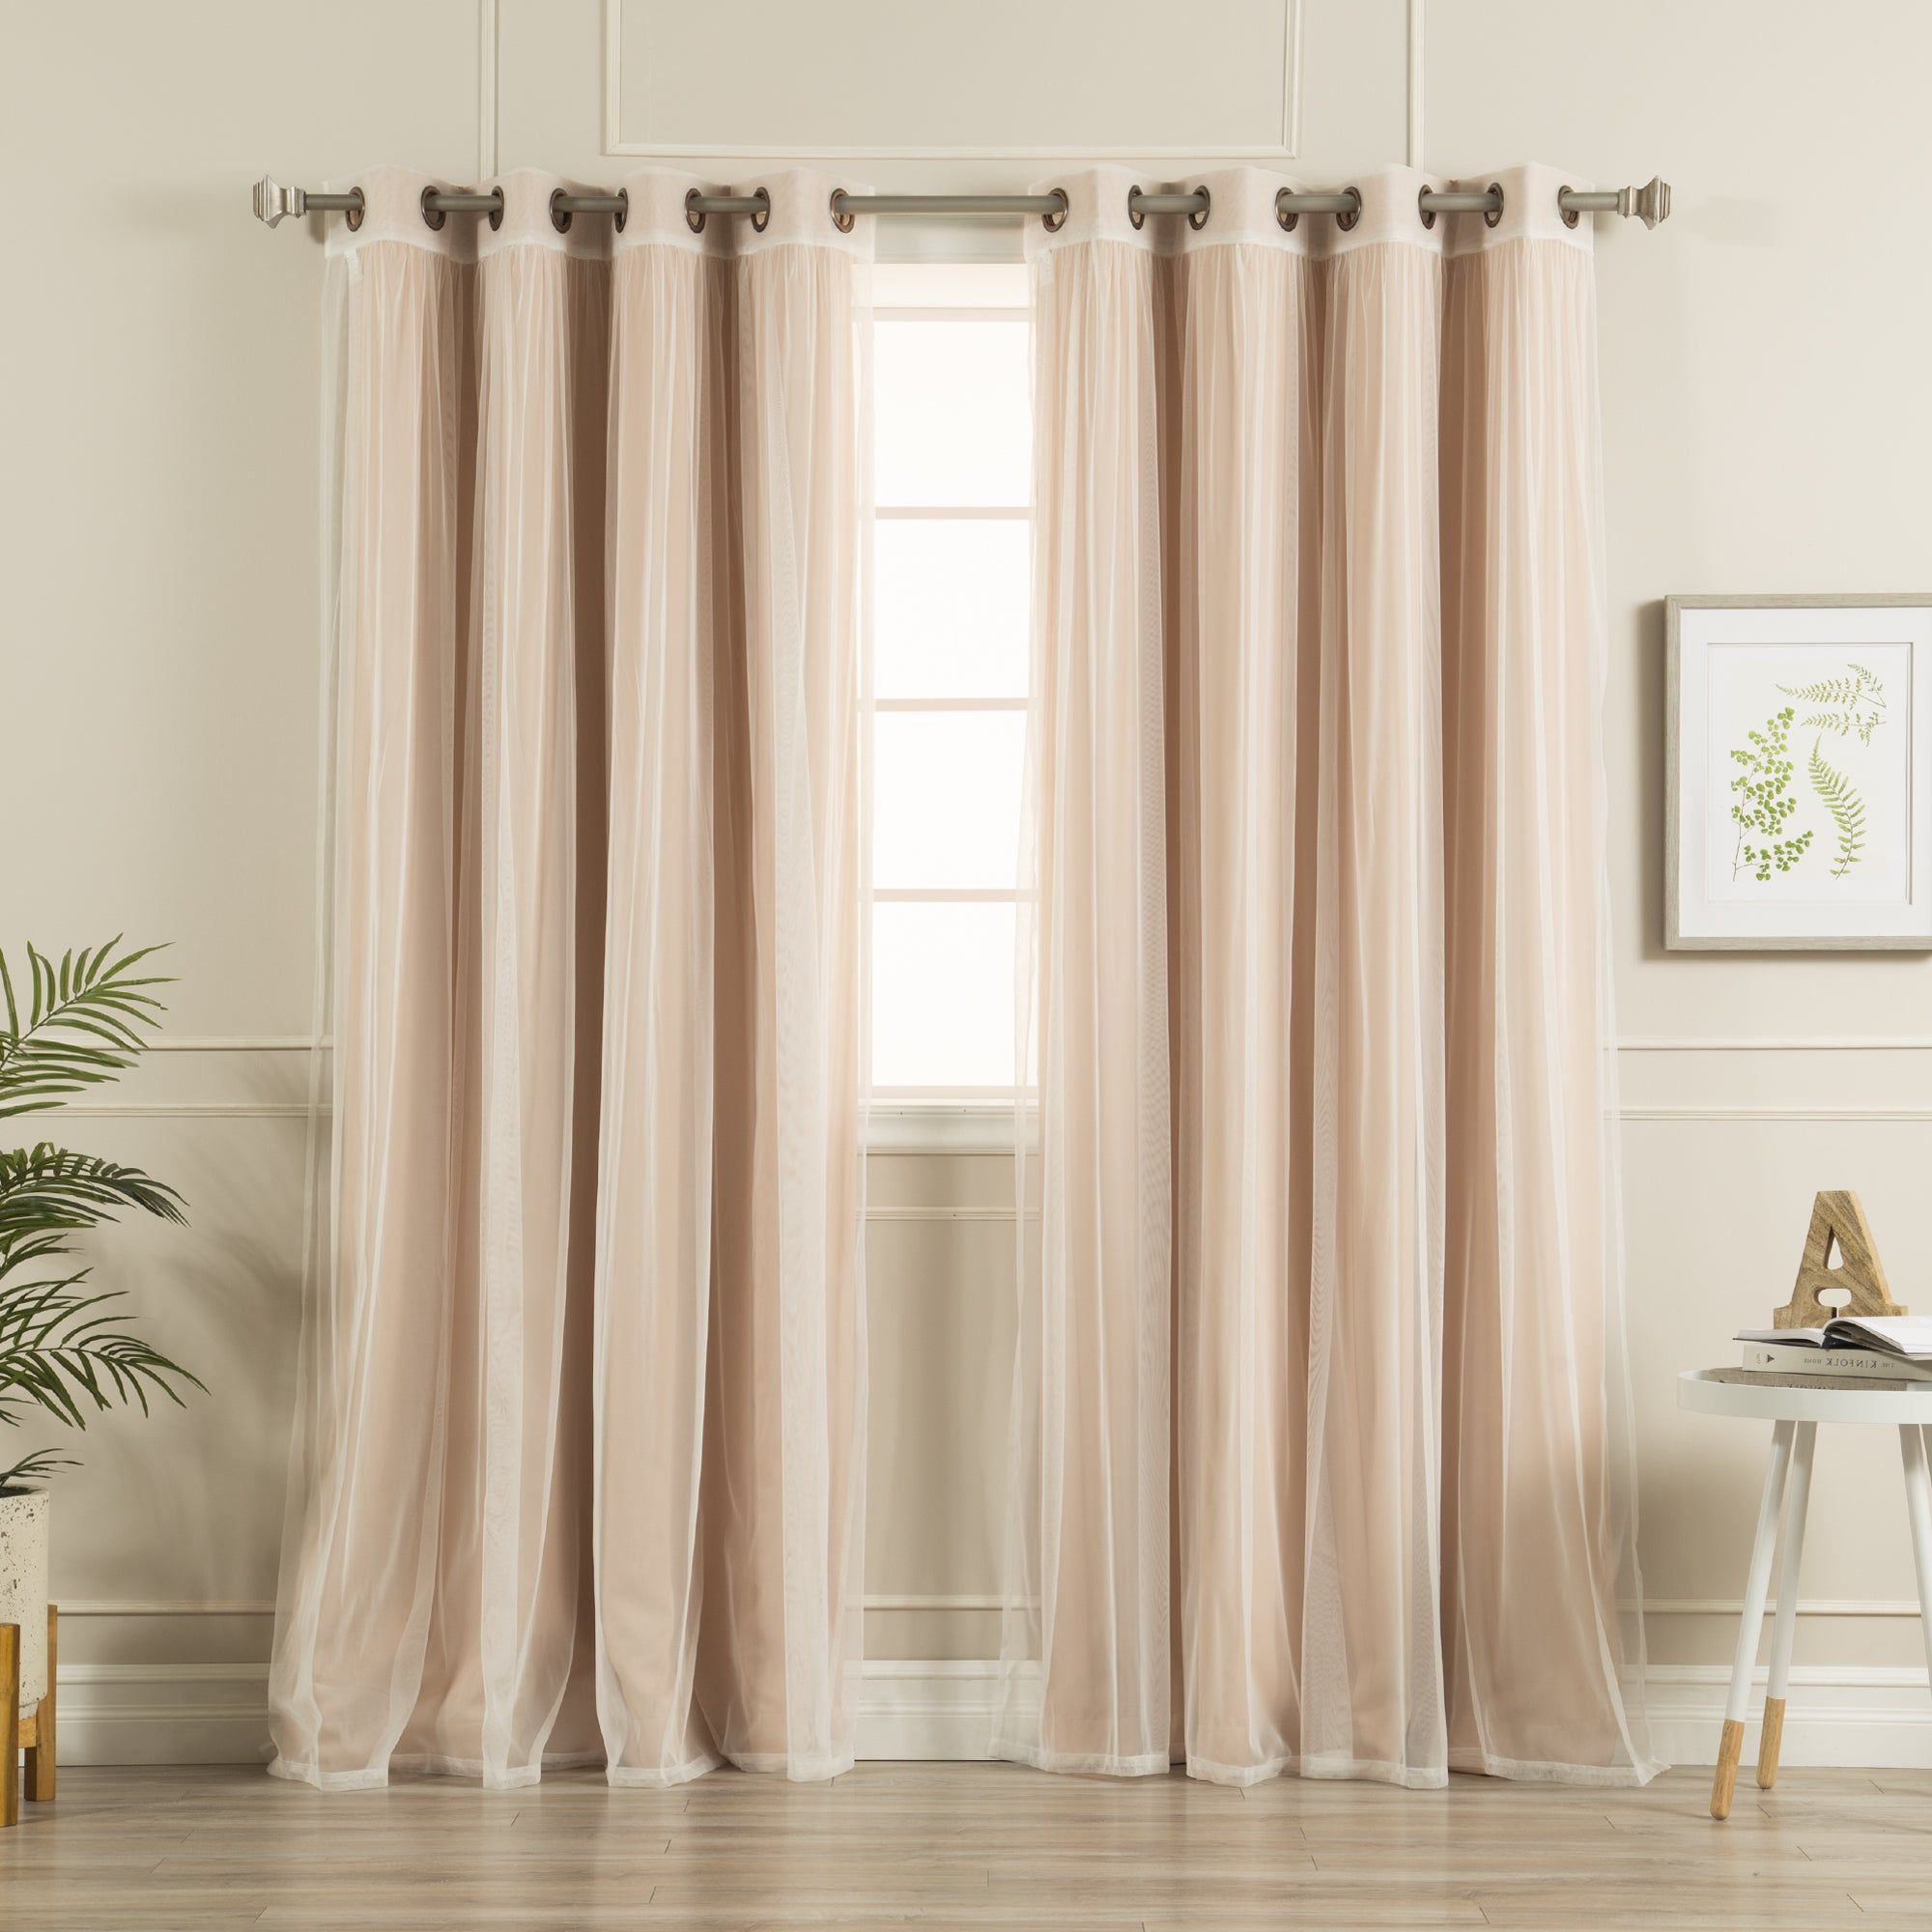 Aurora Home Mix And Match Blackout Tulle Lace Sheer 4 Piece Curtain Panel  Set Regarding Current Mix And Match Blackout Tulle Lace Sheer Curtain Panel Sets (View 7 of 20)